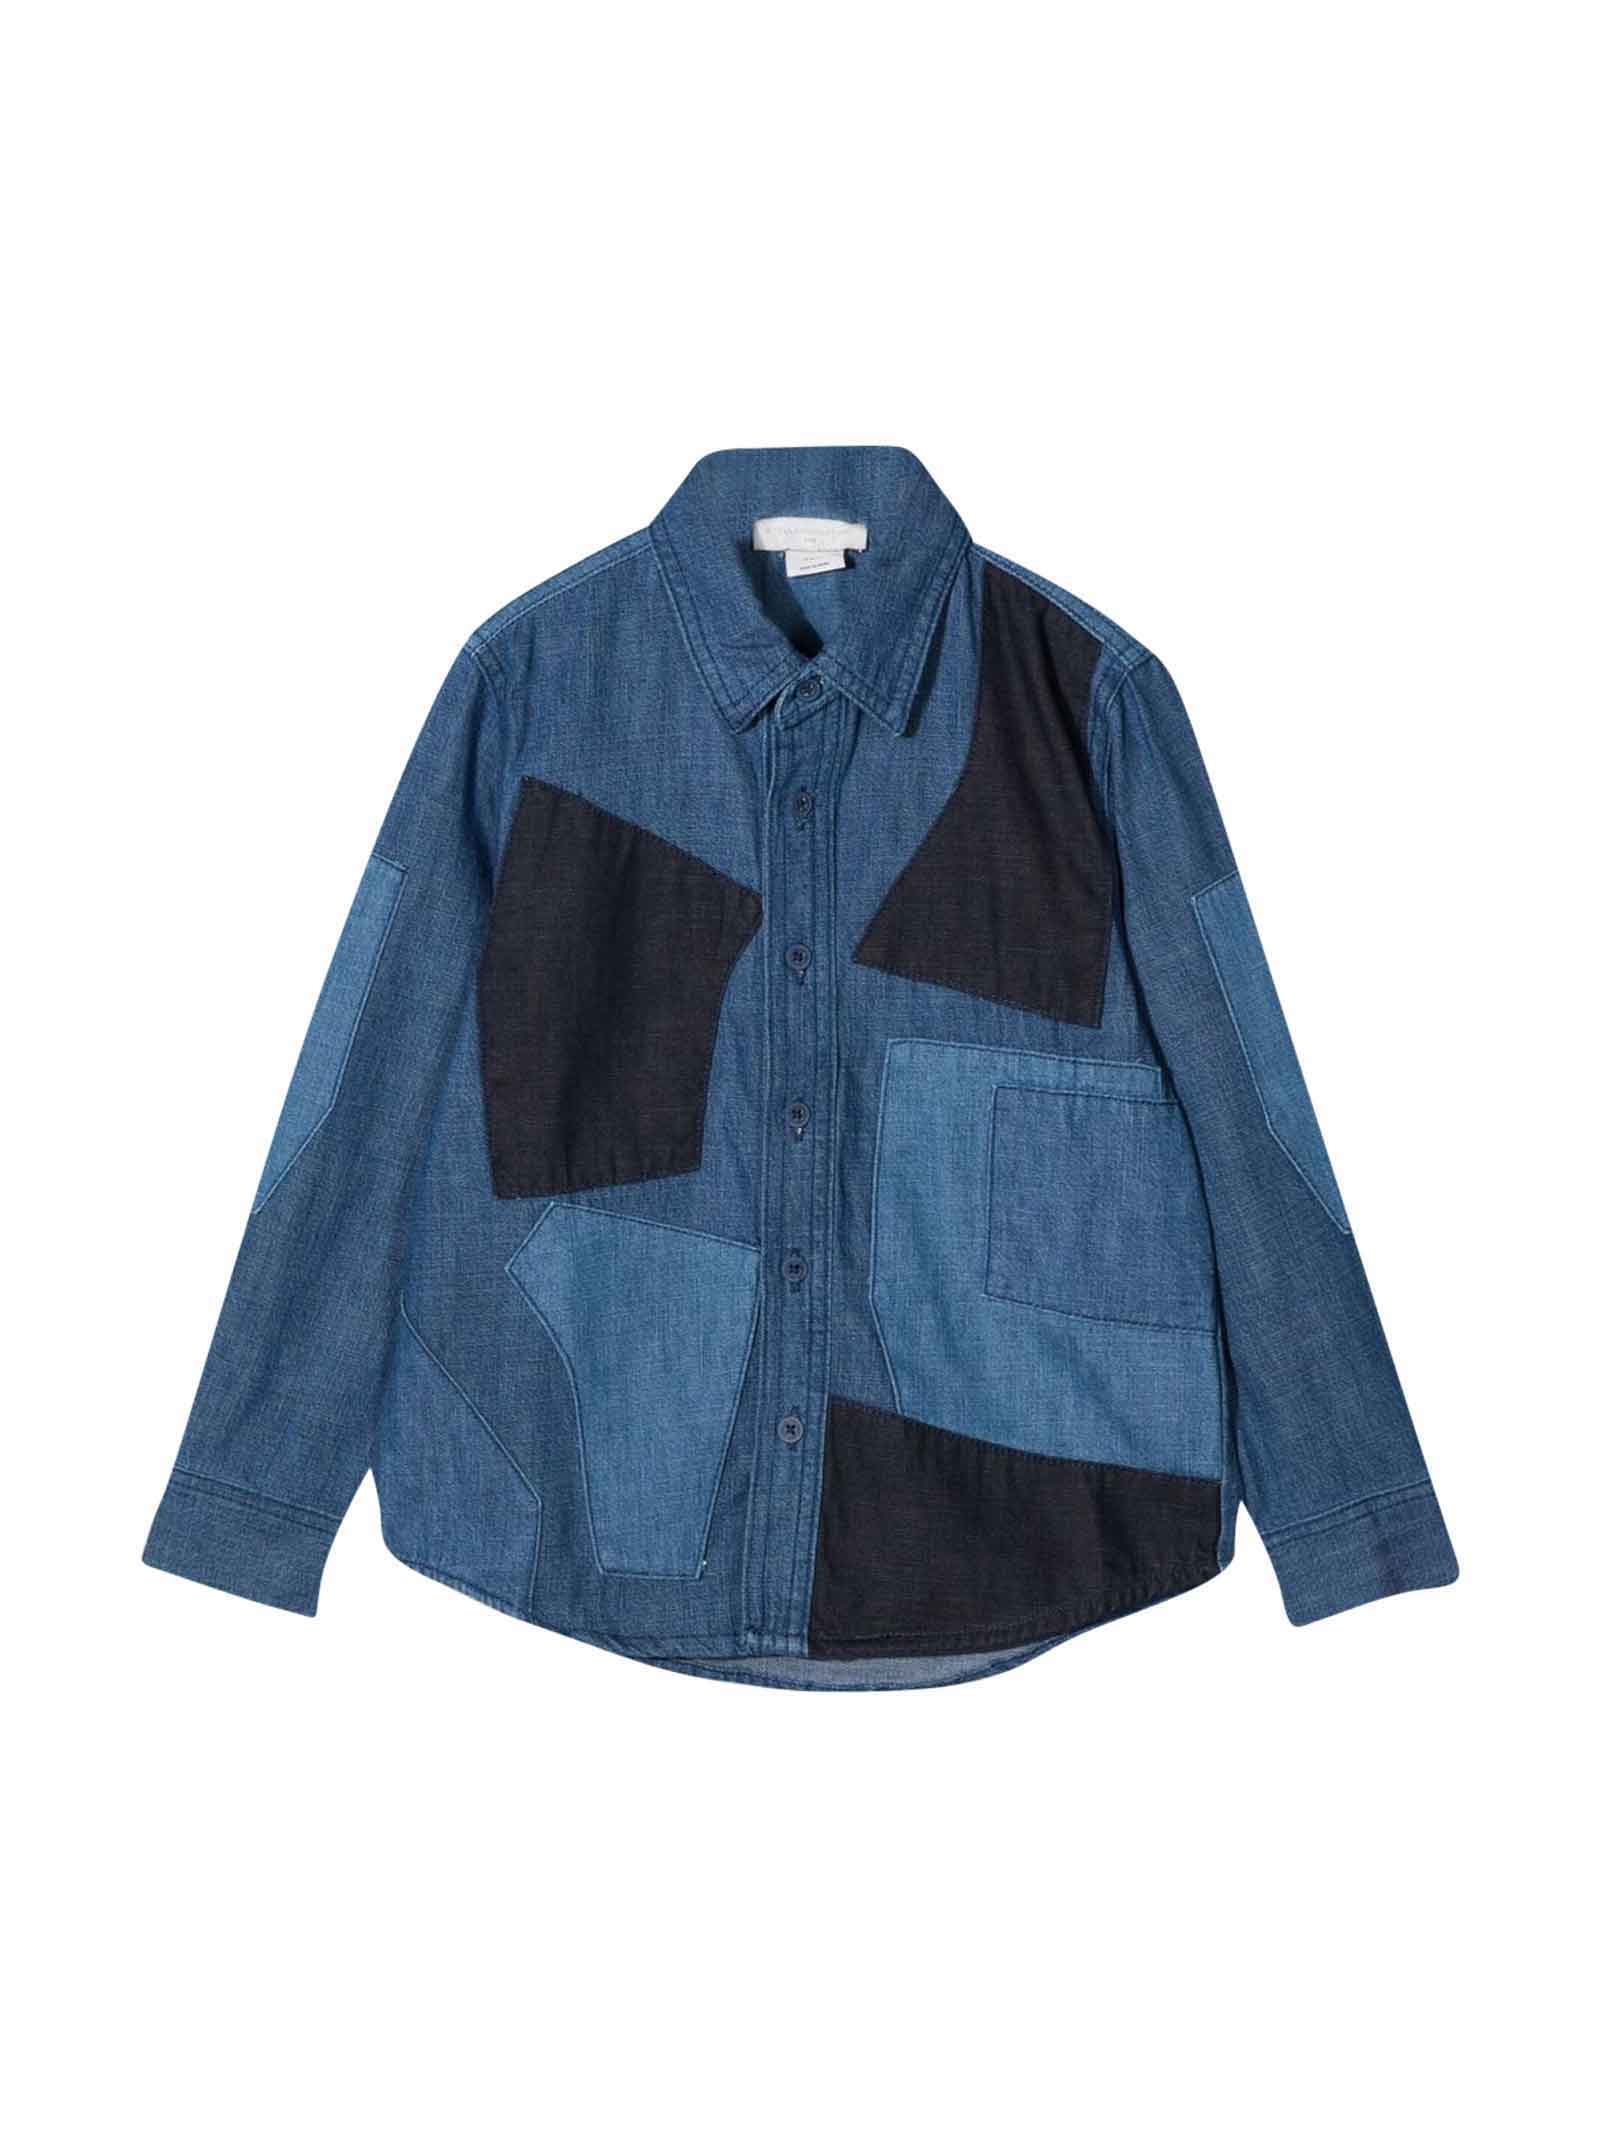 Stella McCartney Kids Blue Denim Shirt With Patchwork, Classic Collar And Frontal Closure